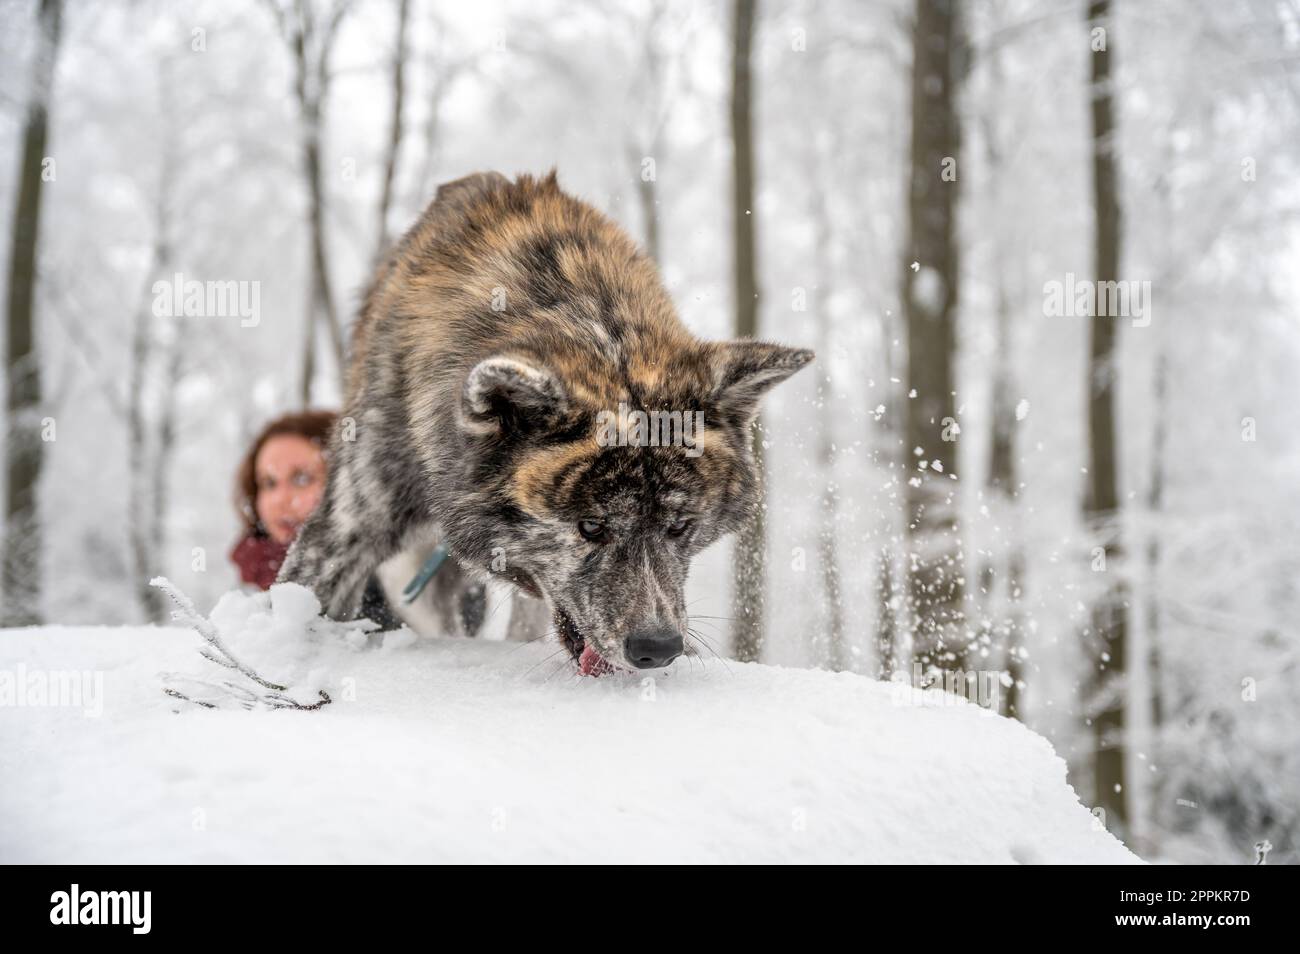 Akita inu dog with gray and orange fur is climbing on a rock in the forest during winter with lots of snow, female master with brown curly hair in the background Stock Photo